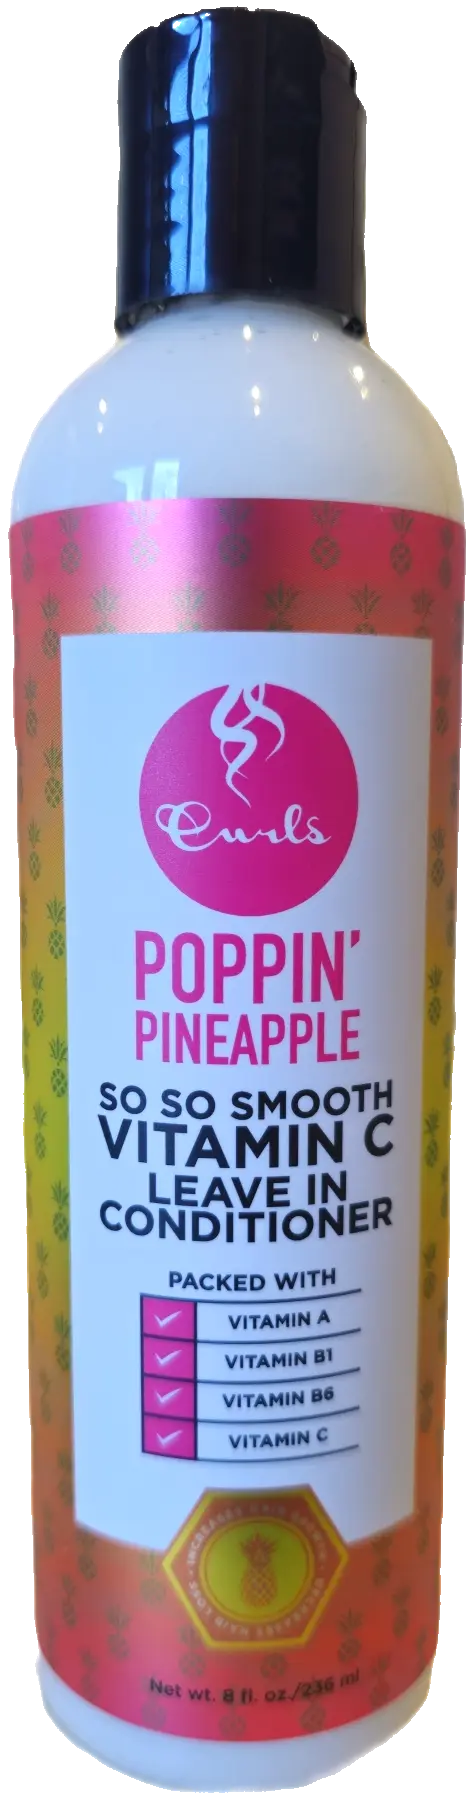 Curls Poppin Pineapple Leave in Conditioner